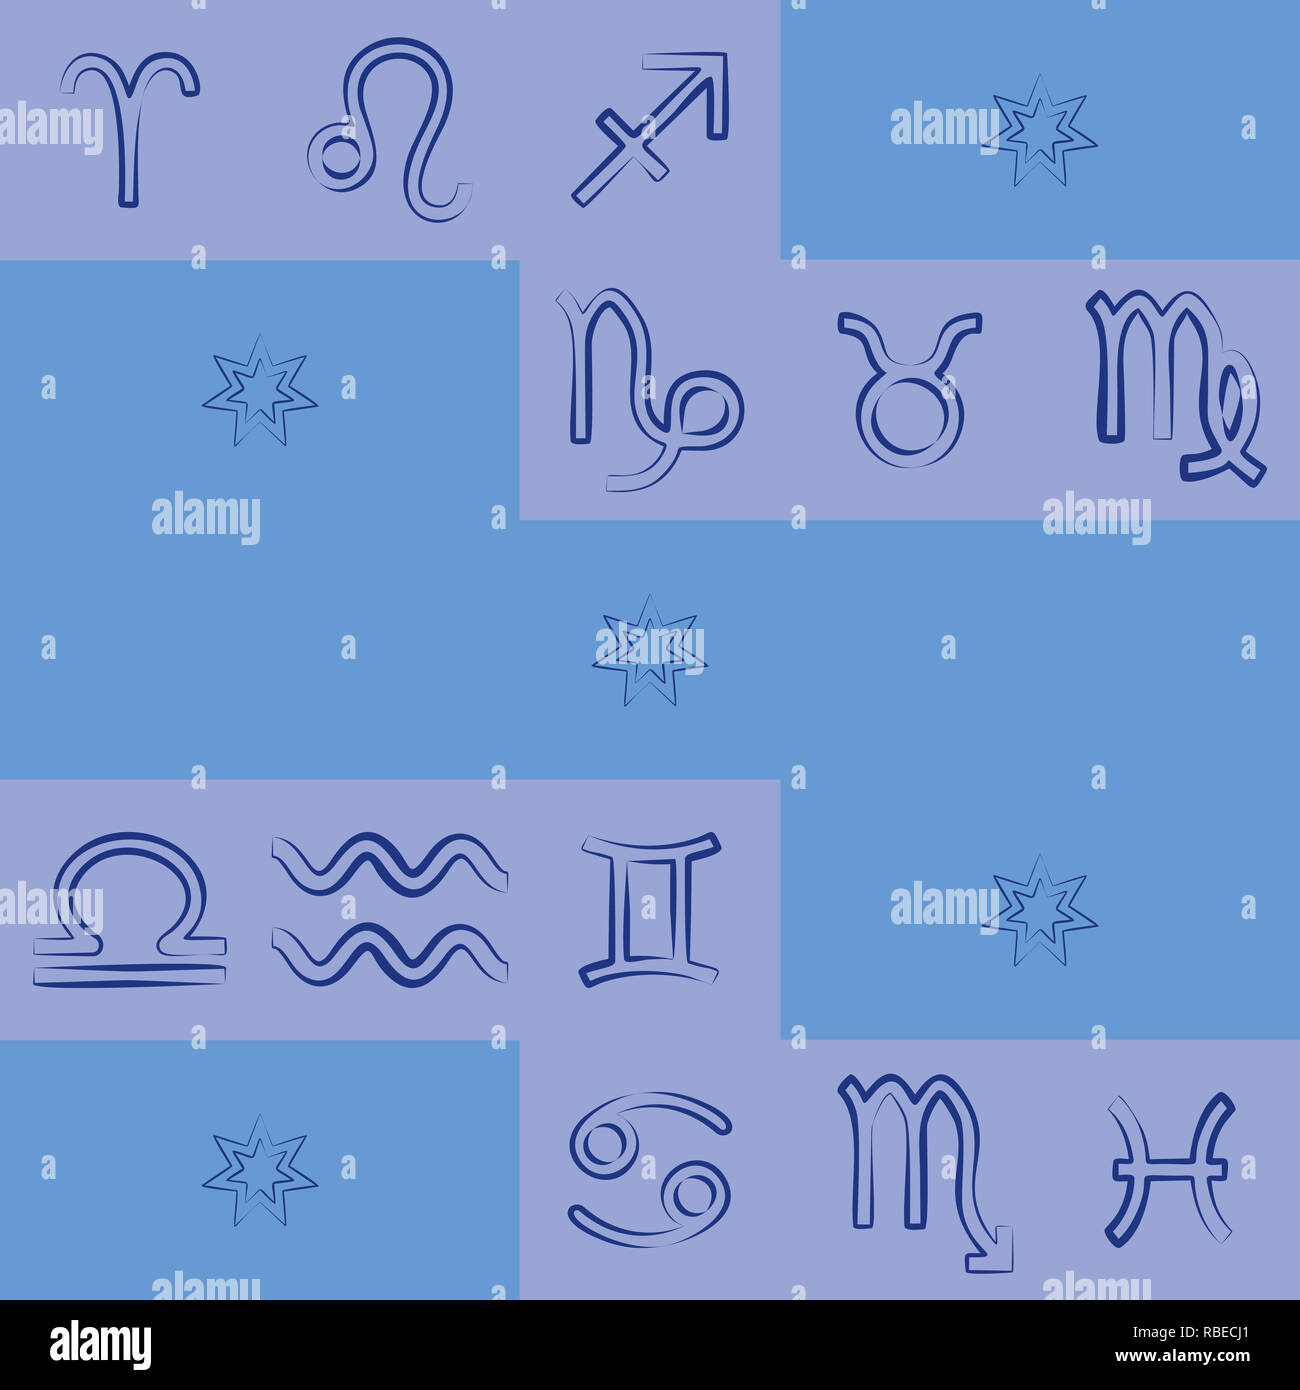 Zodiac signs irregular pattern in shades of blue Stock Photo